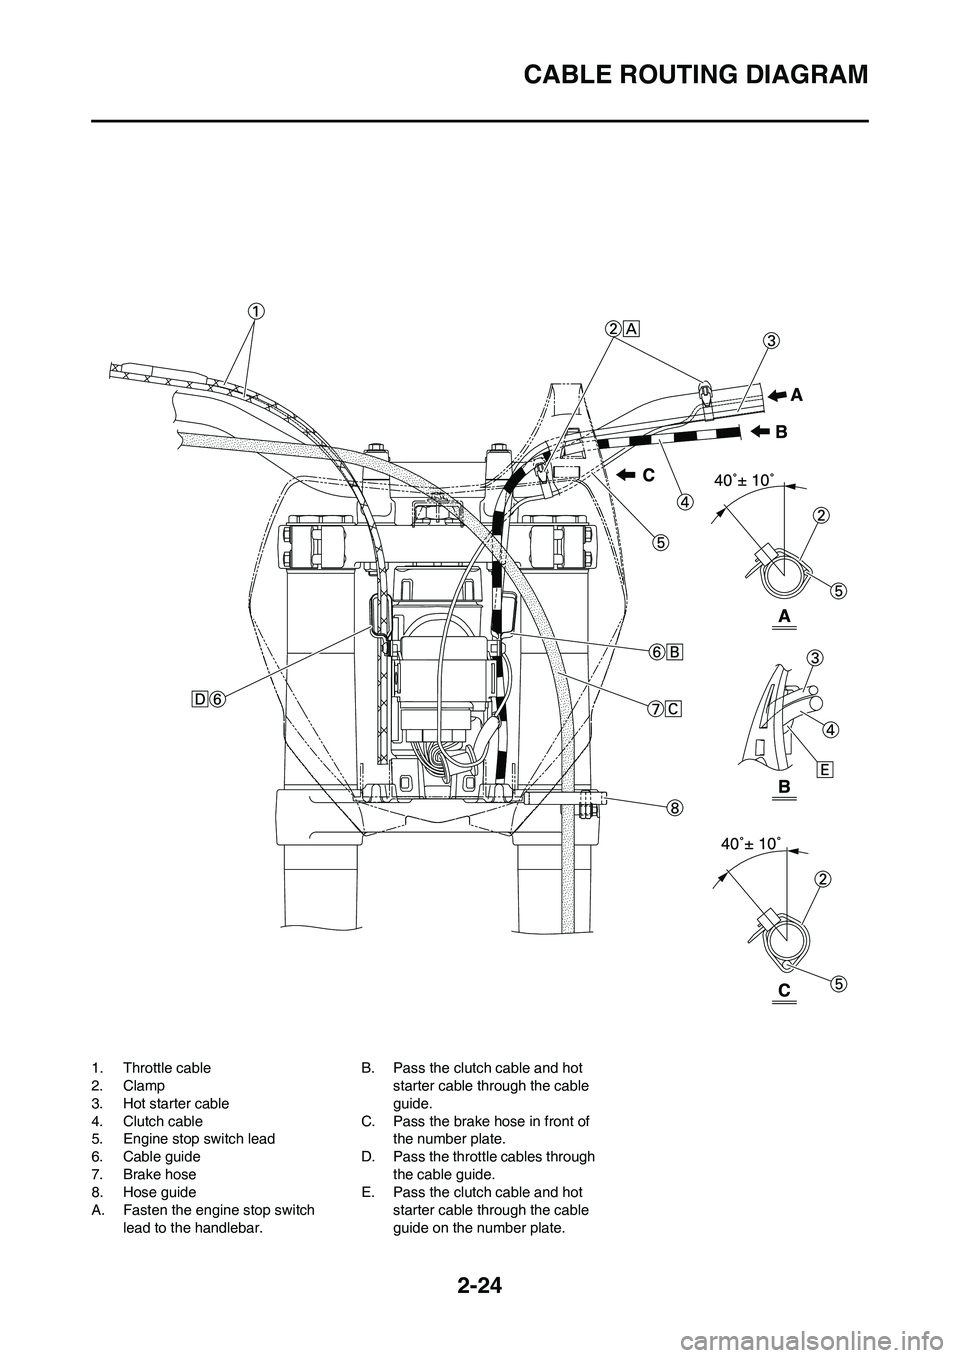 YAMAHA YZ450F 2009 Service Manual 2-24
CABLE ROUTING DIAGRAM
1. Throttle cable
2. Clamp
3. Hot starter cable
4. Clutch cable
5. Engine stop switch lead
6. Cable guide
7. Brake hose
8. Hose guide
A. Fasten the engine stop switch 
lead 